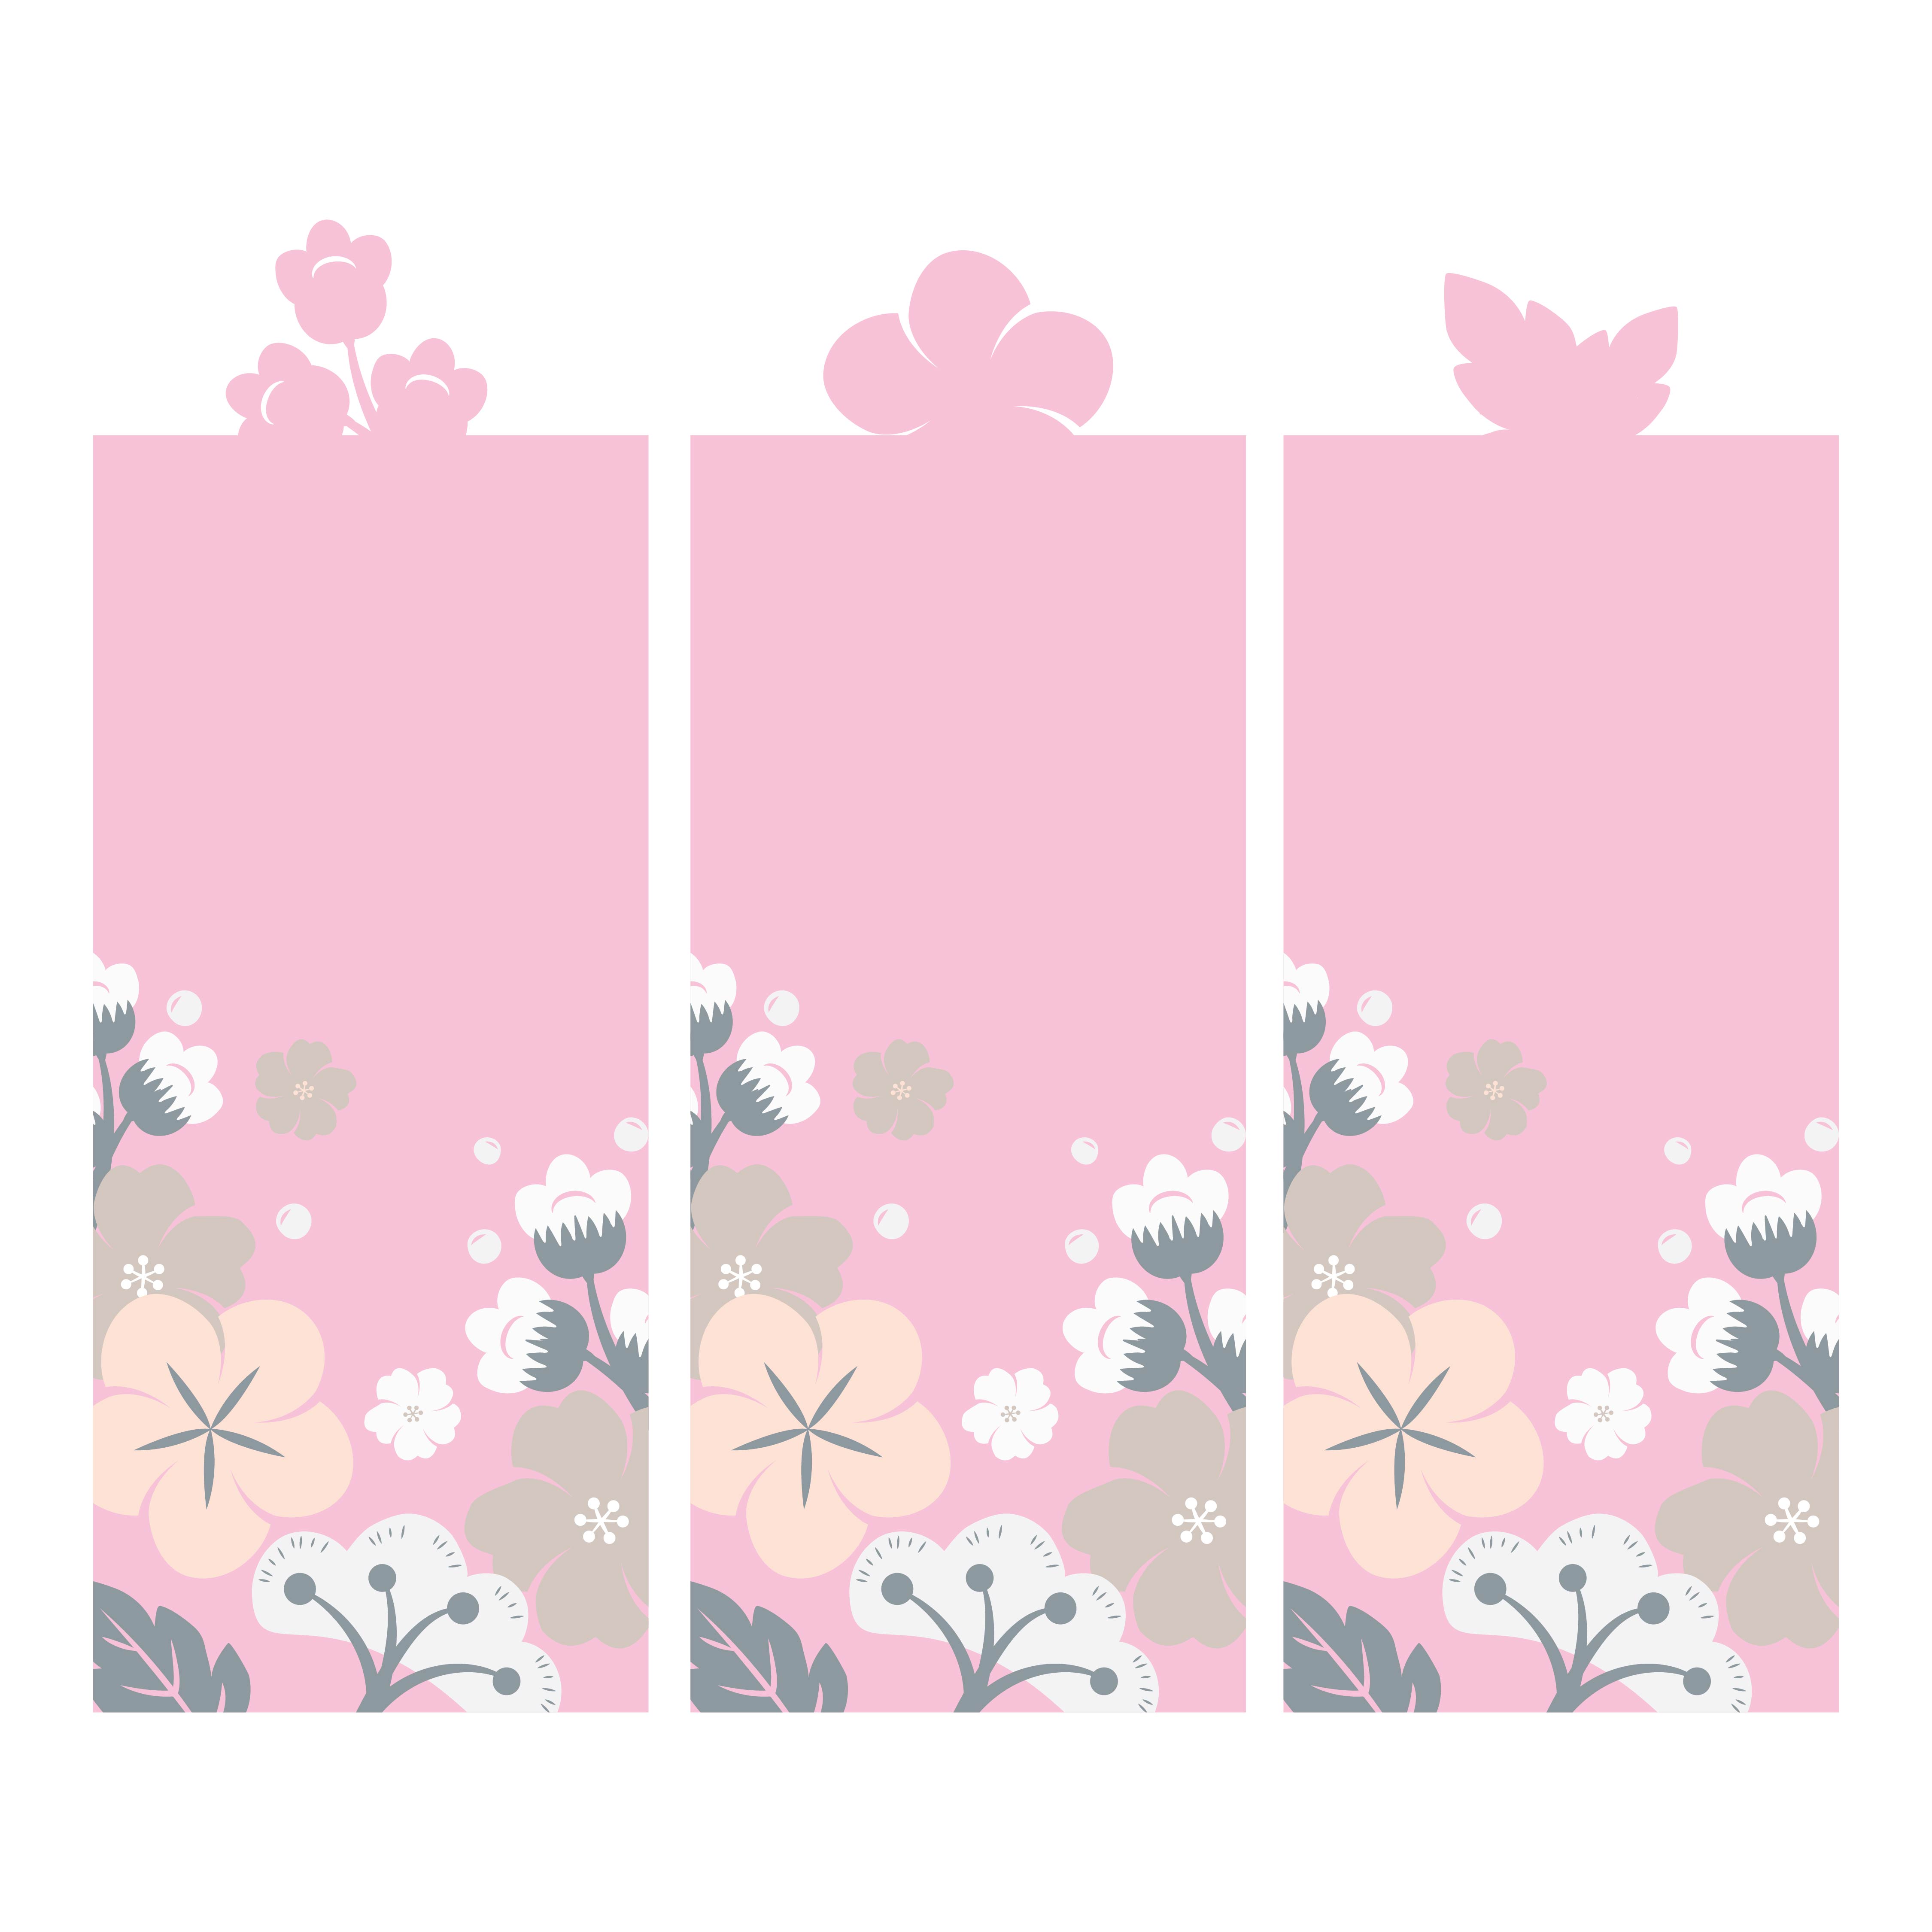 Bookmark Template for Print